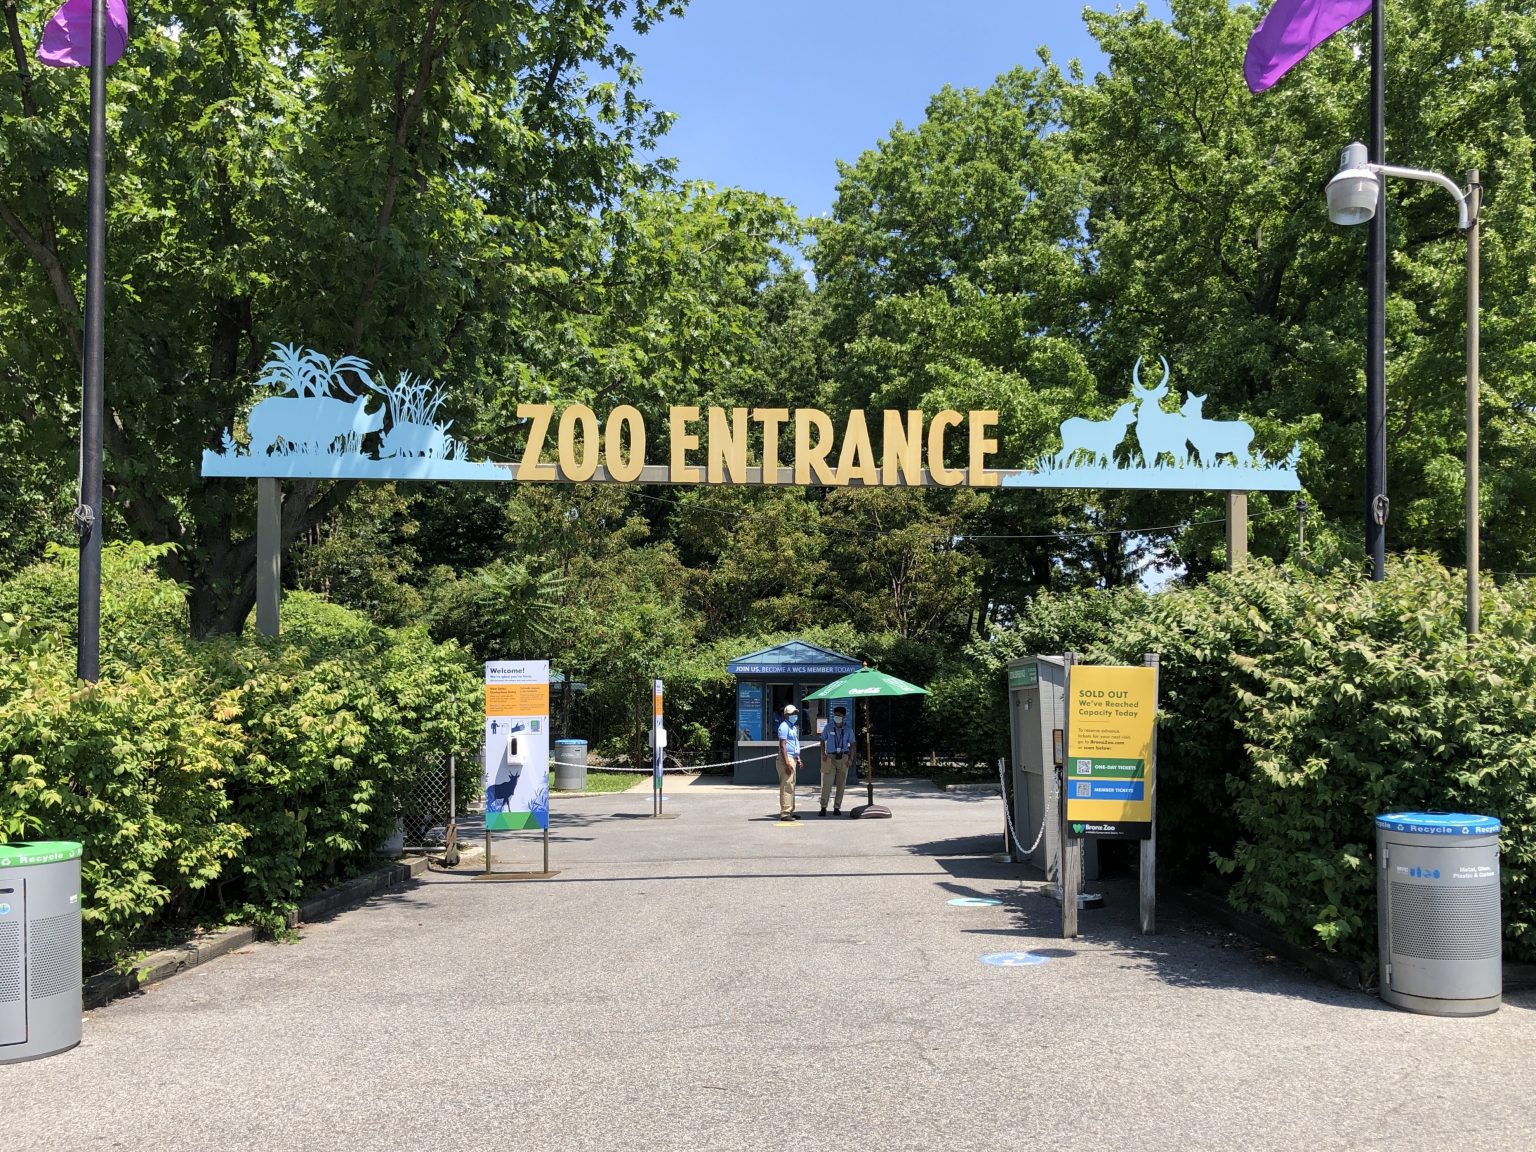 Go wild! Zoo’s galore and more as NYC attractions reopen amNewYork